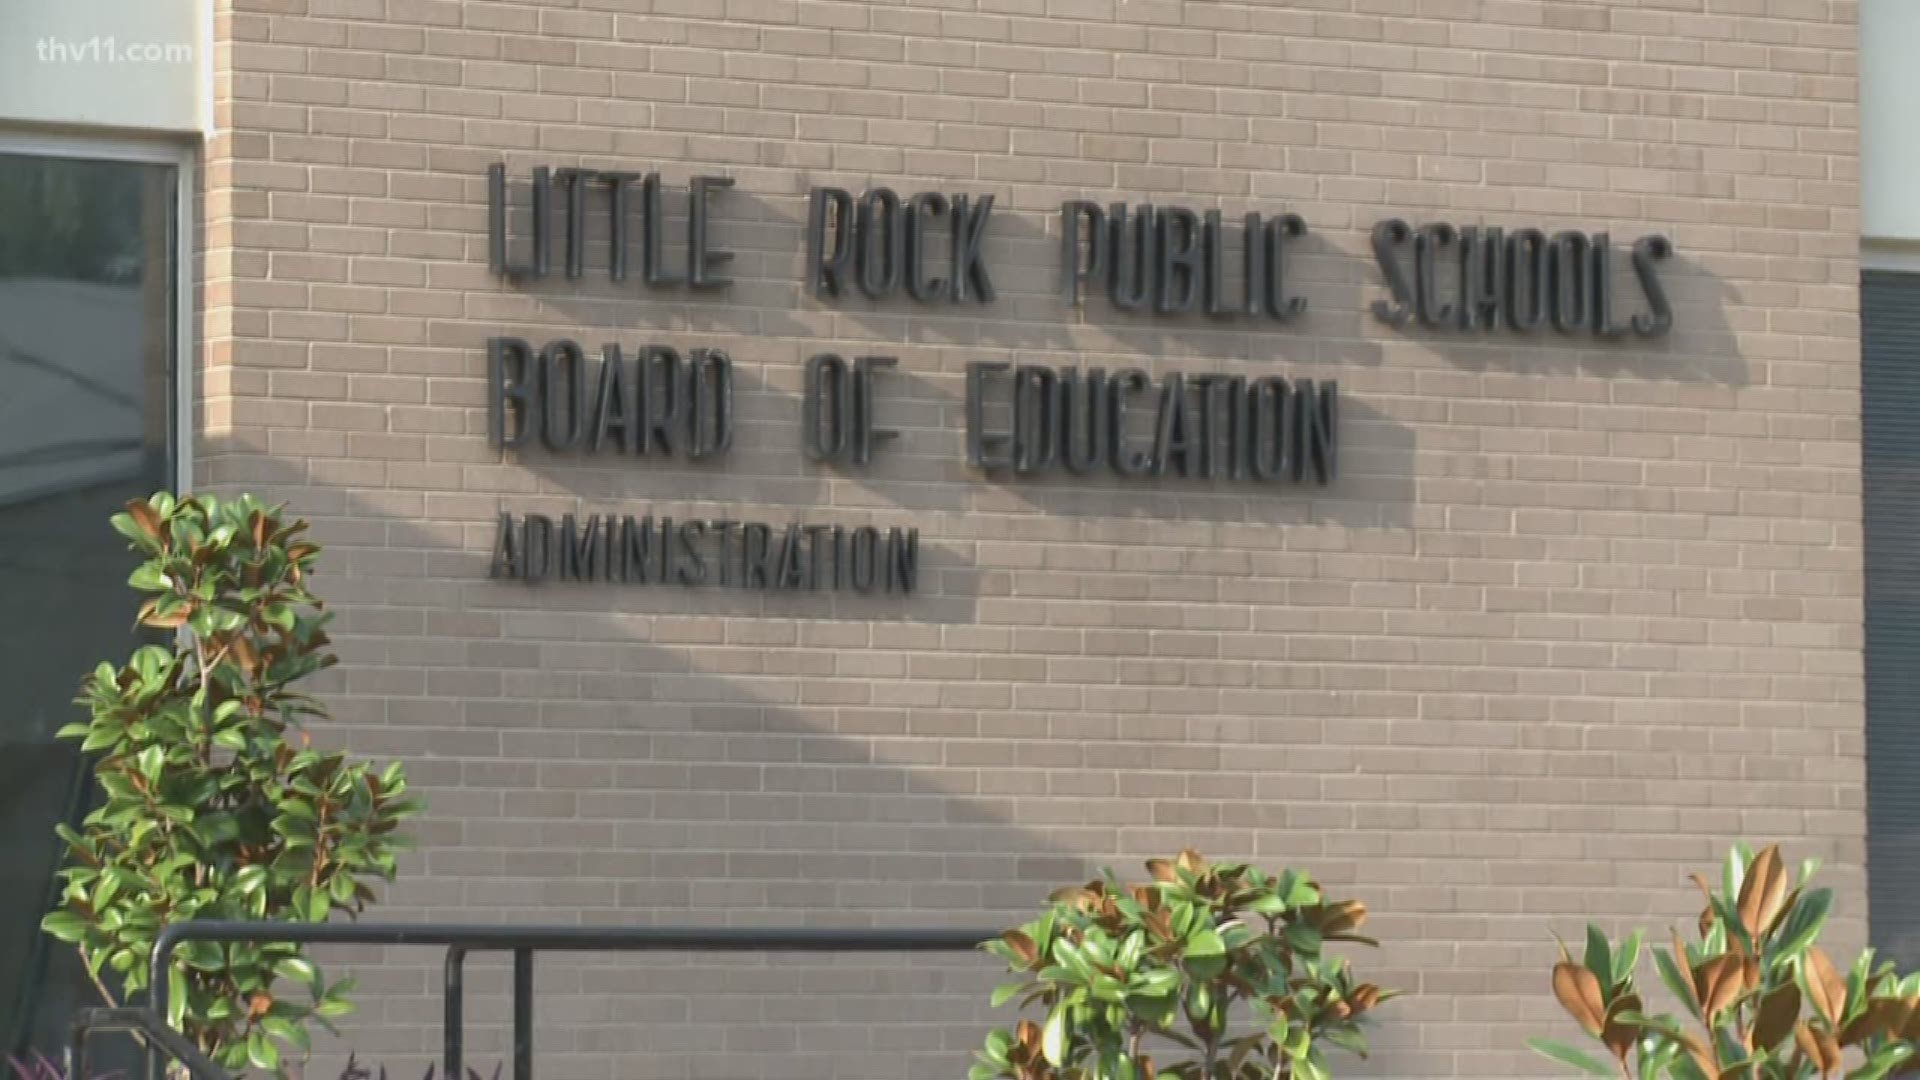 Anger has been building for some in the city ever since the state board of education passed potential future framework for the Little Rock School District.